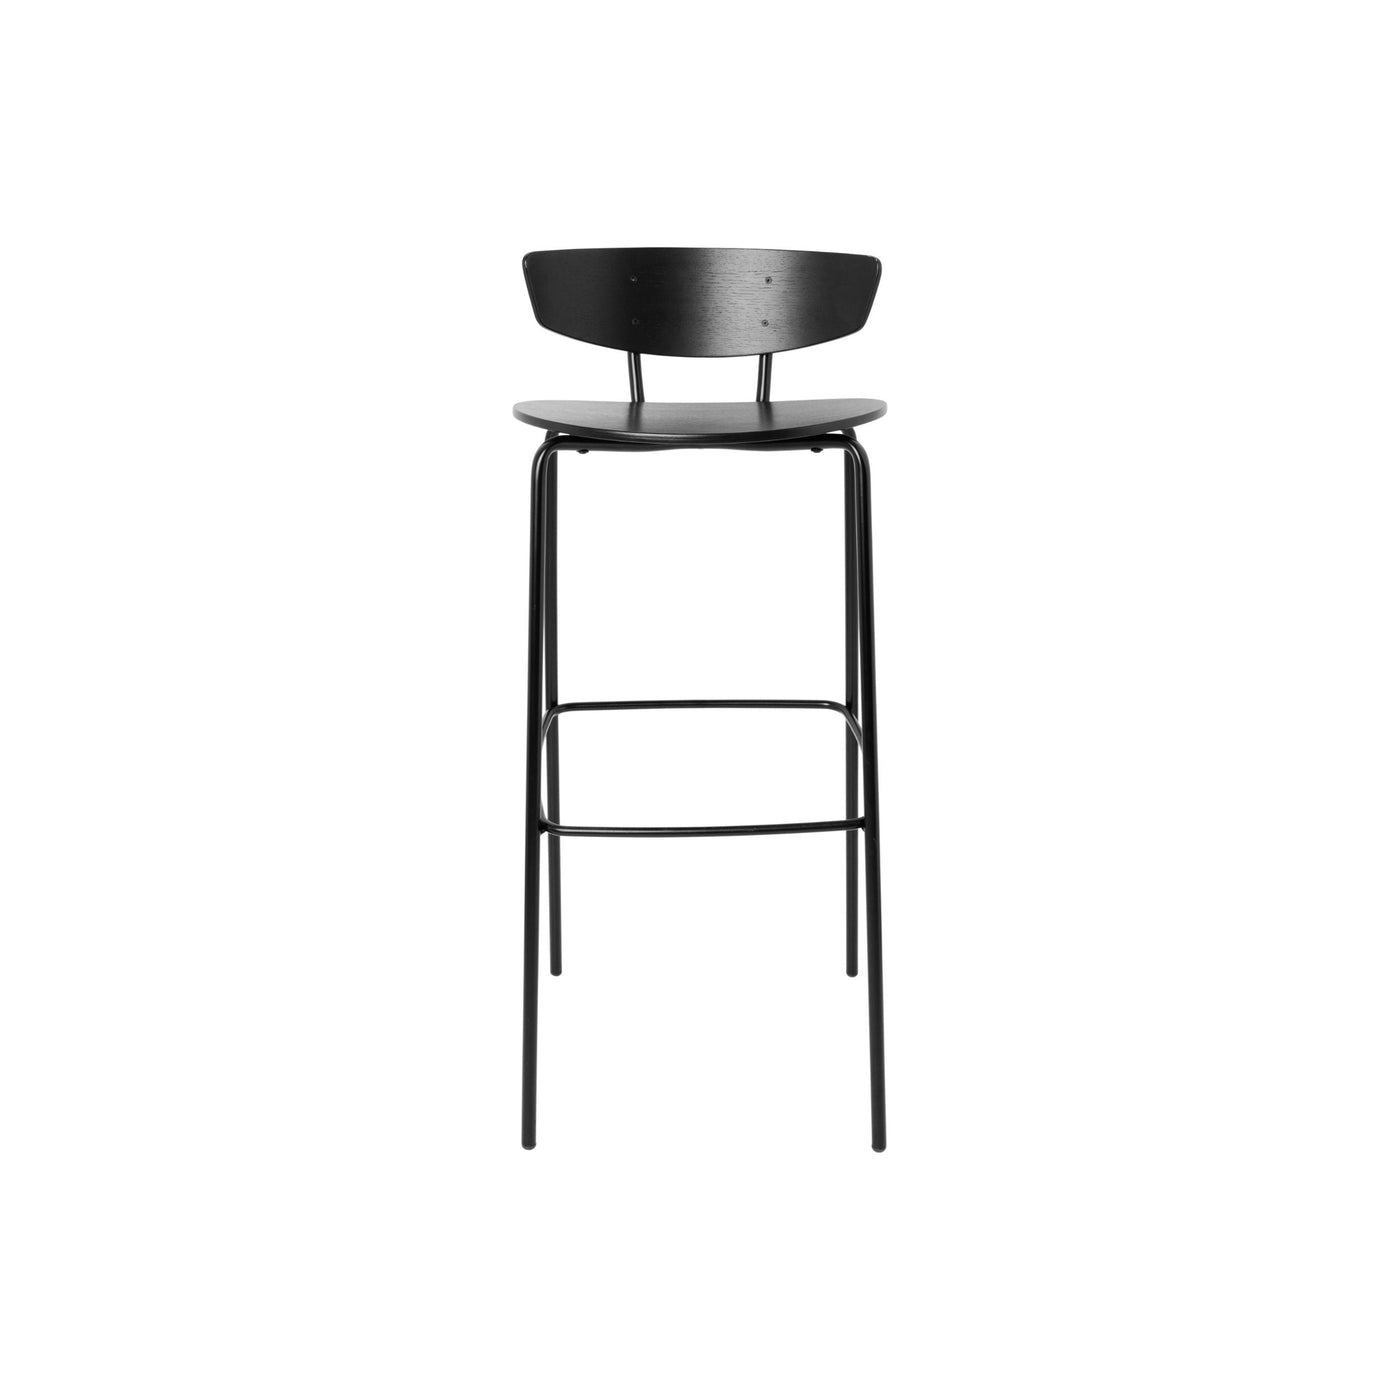 Ferm Living Herman Bar Chair in black. Free UK delivery from someday designs. #colour_black